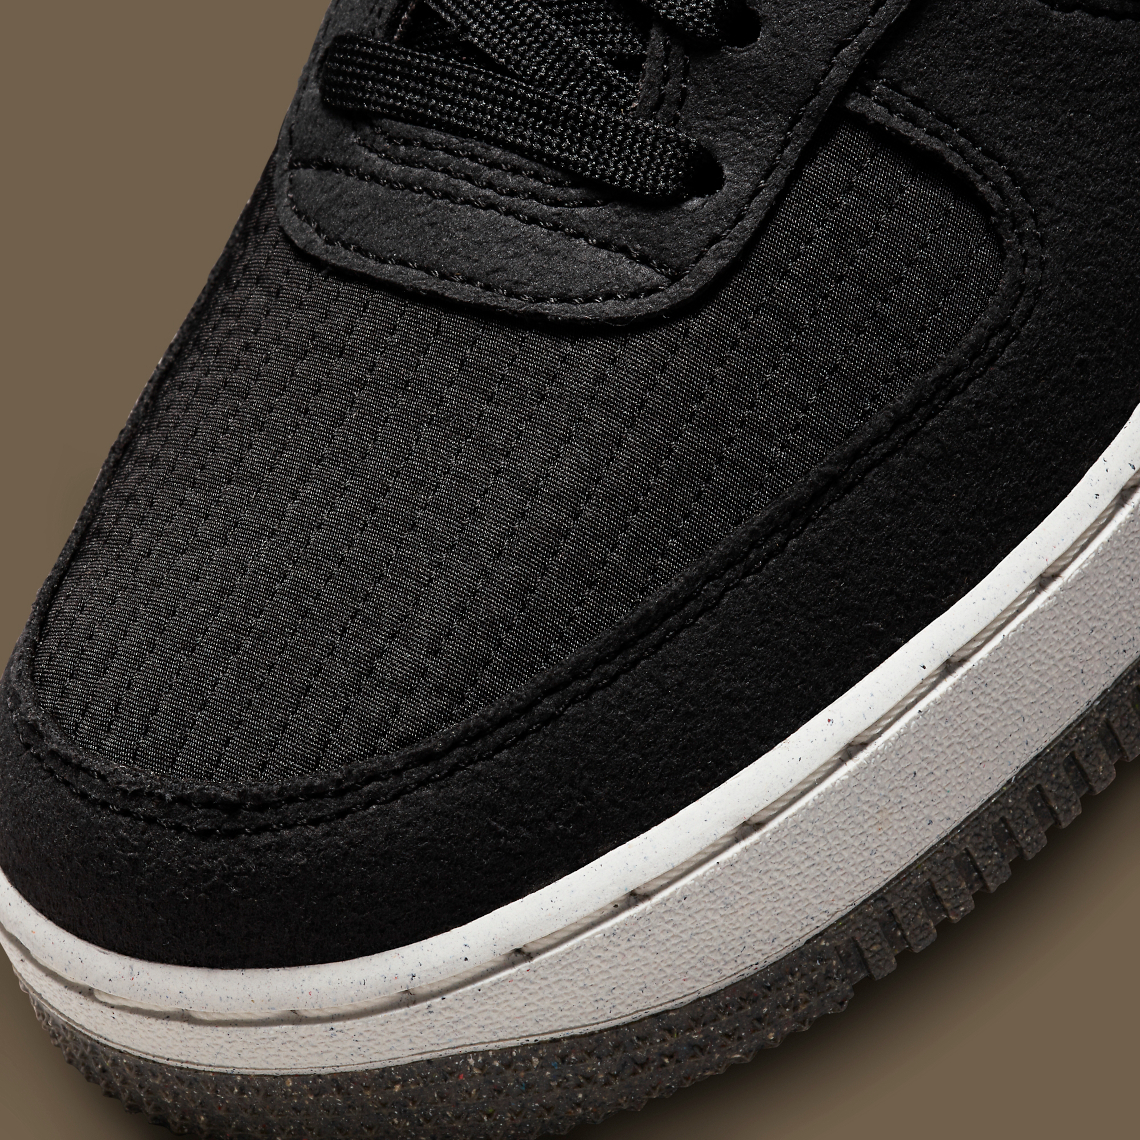 Nike Air Force 1 Low Toasty Black DC8871-001 | SneakerNews.com